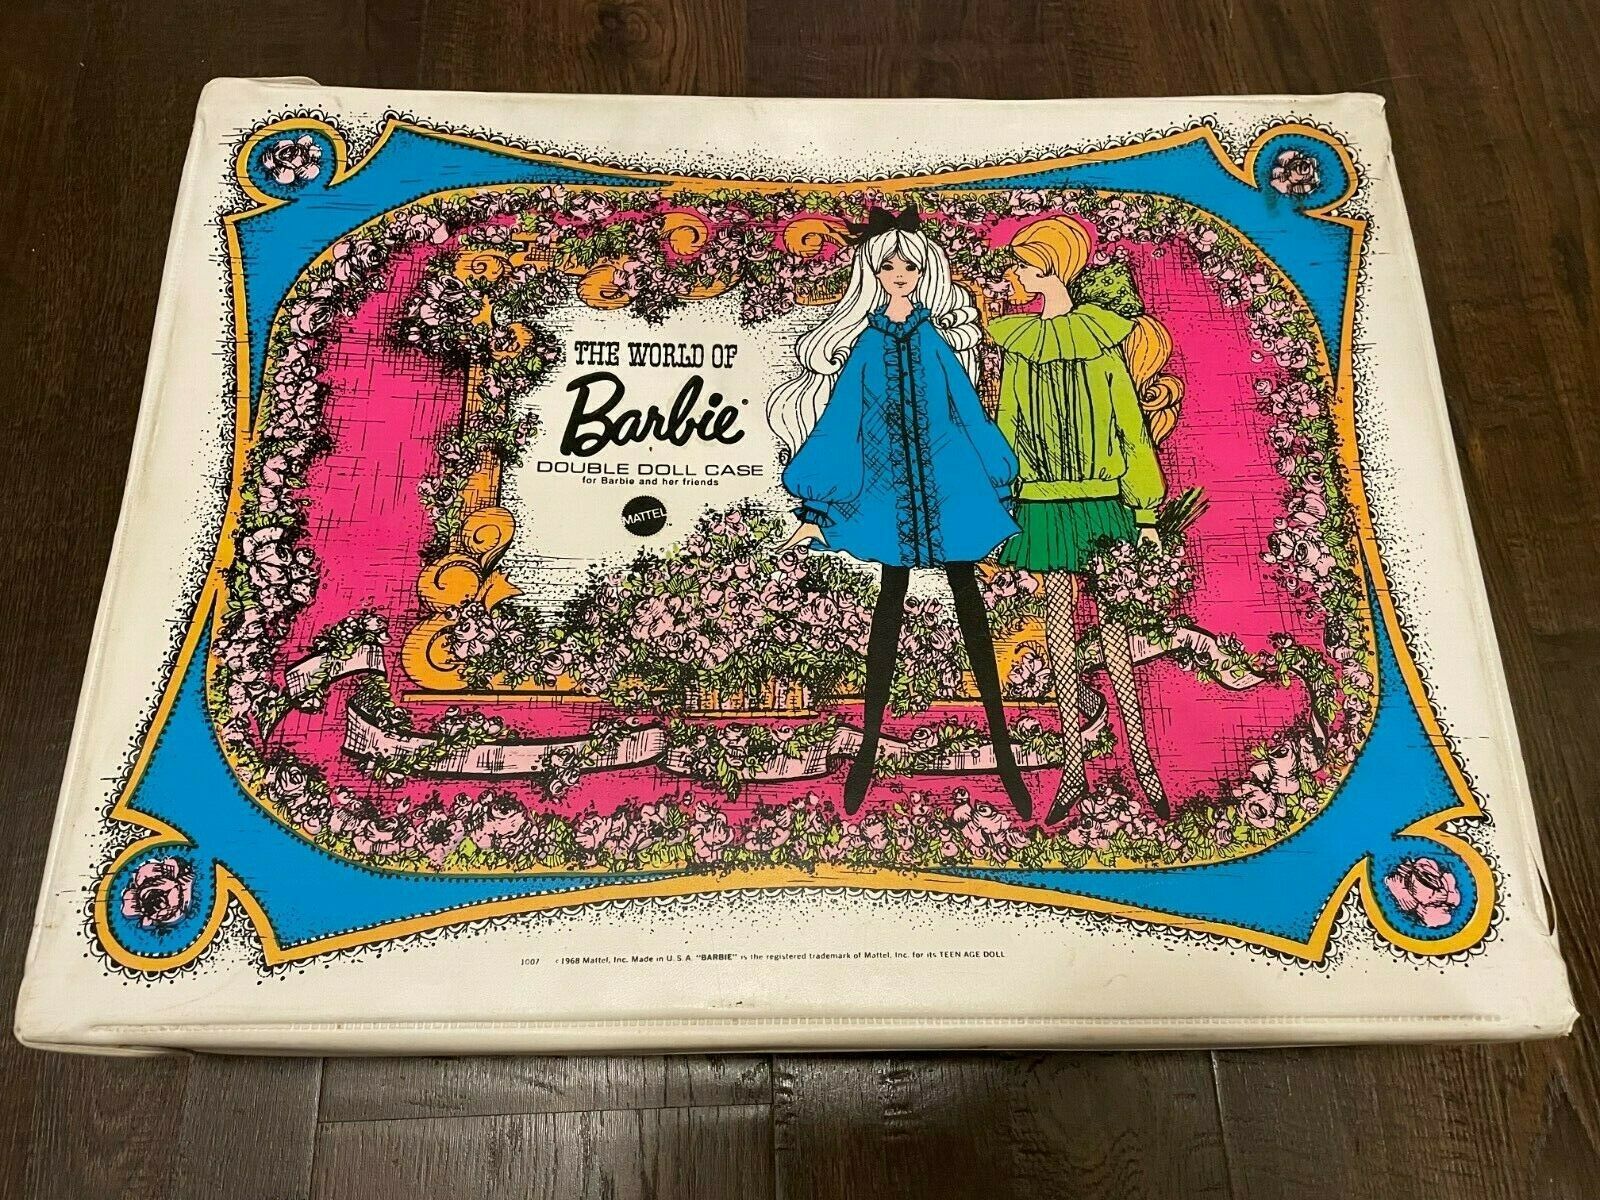 Vintage The World Of Barbie 1968 Double Doll Case, With Dolls, And Clothing